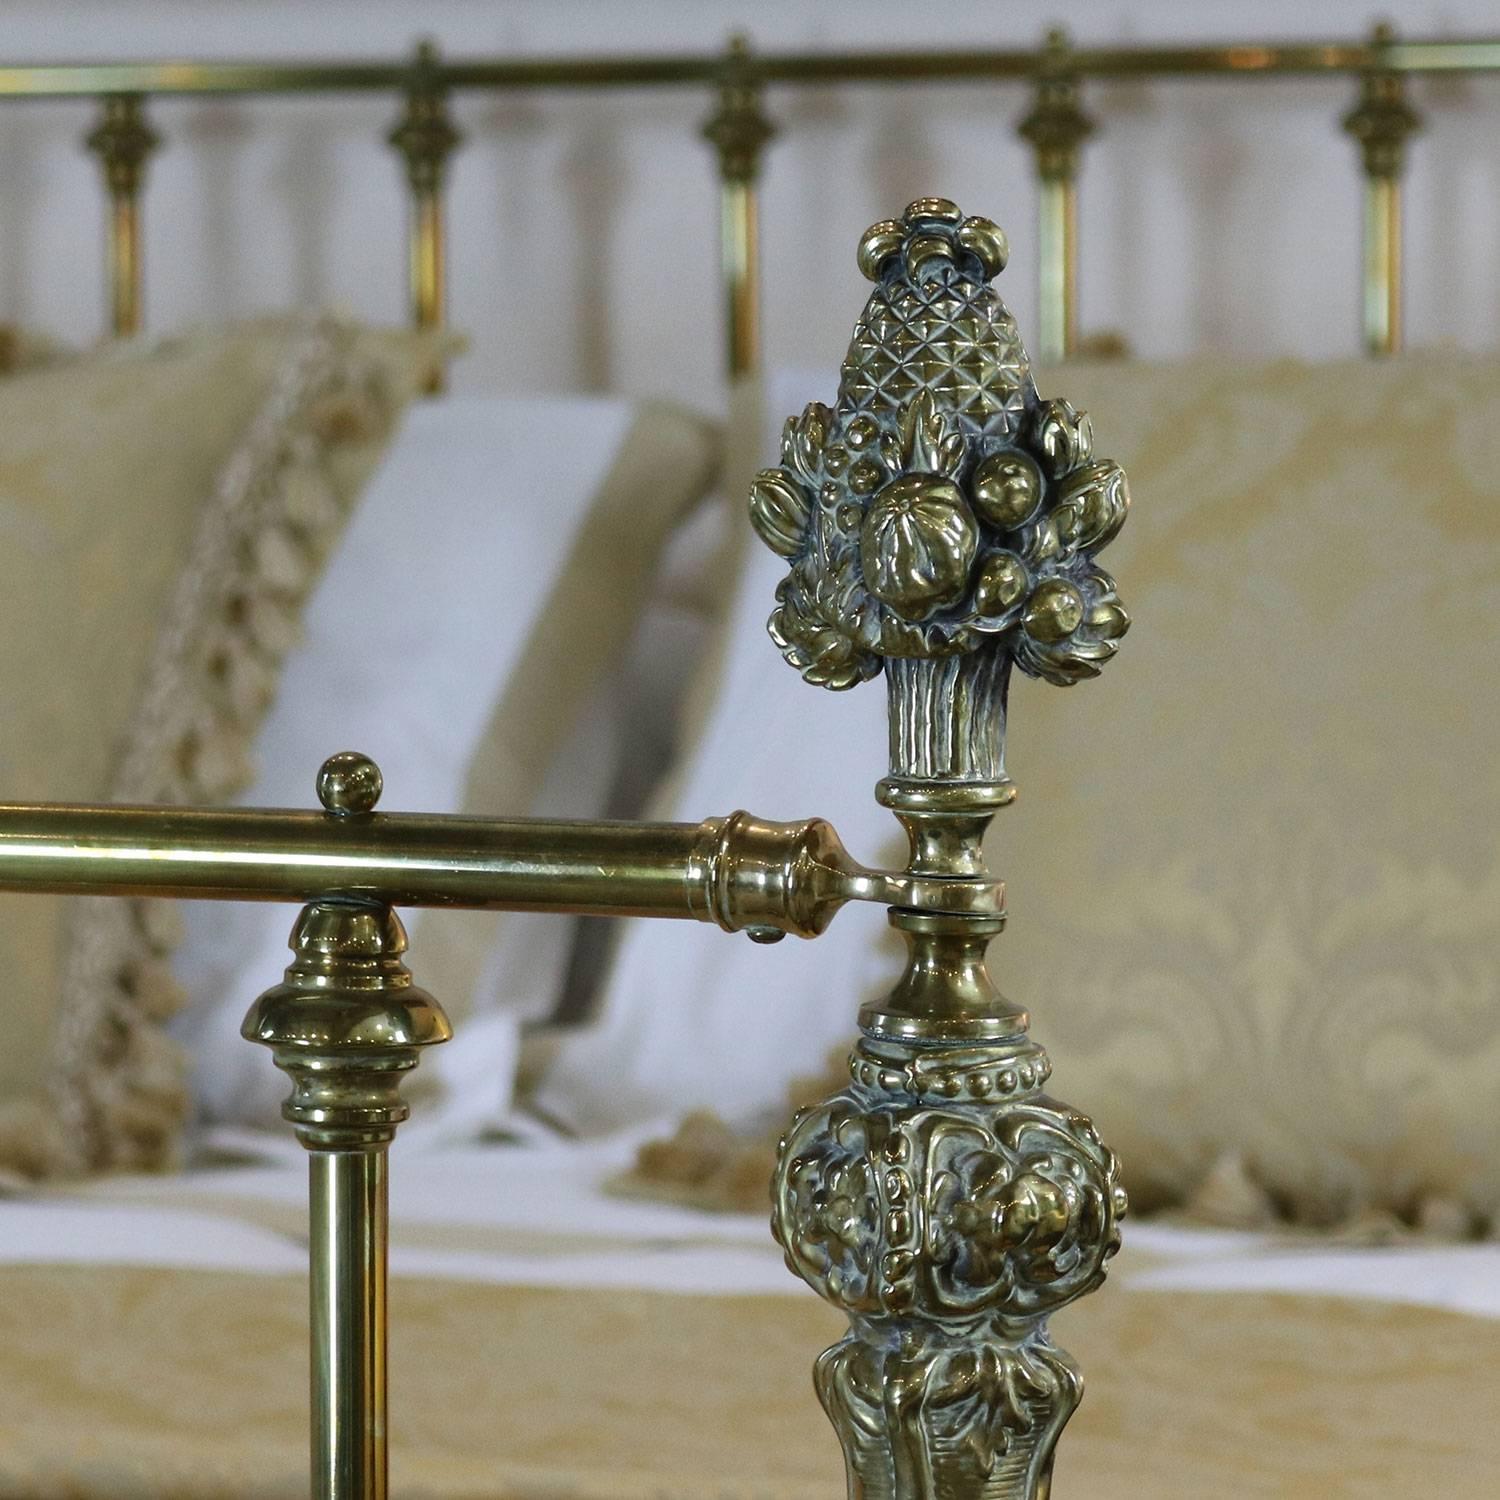 English Brass Bedstead with Decorative Fittings